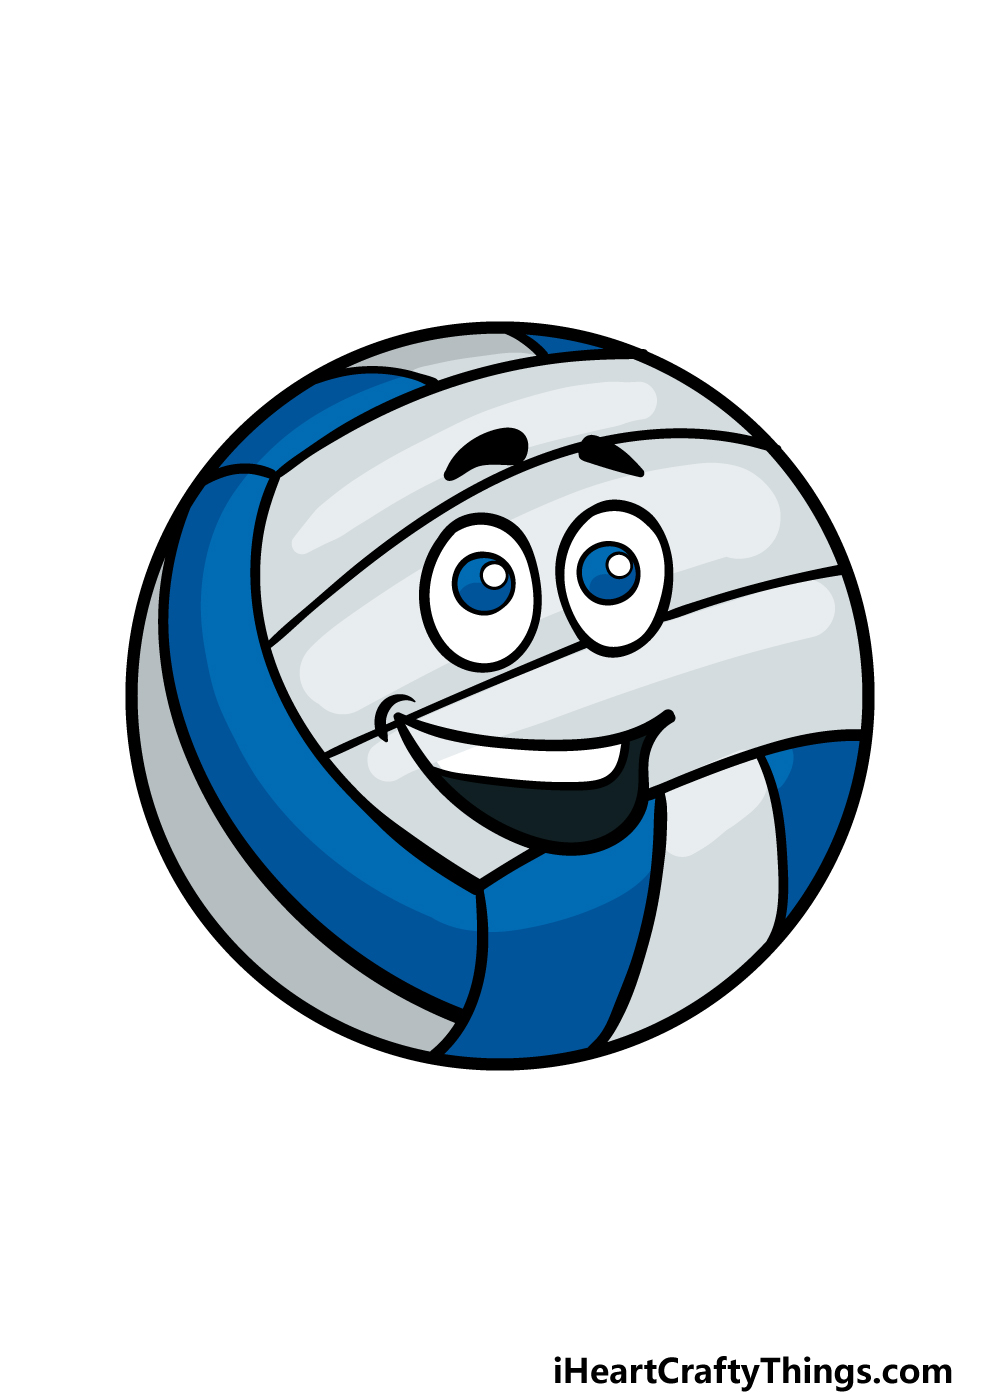 Cartoon Volleyball Drawing - How To Draw A Cartoon Volleyball Step By Step